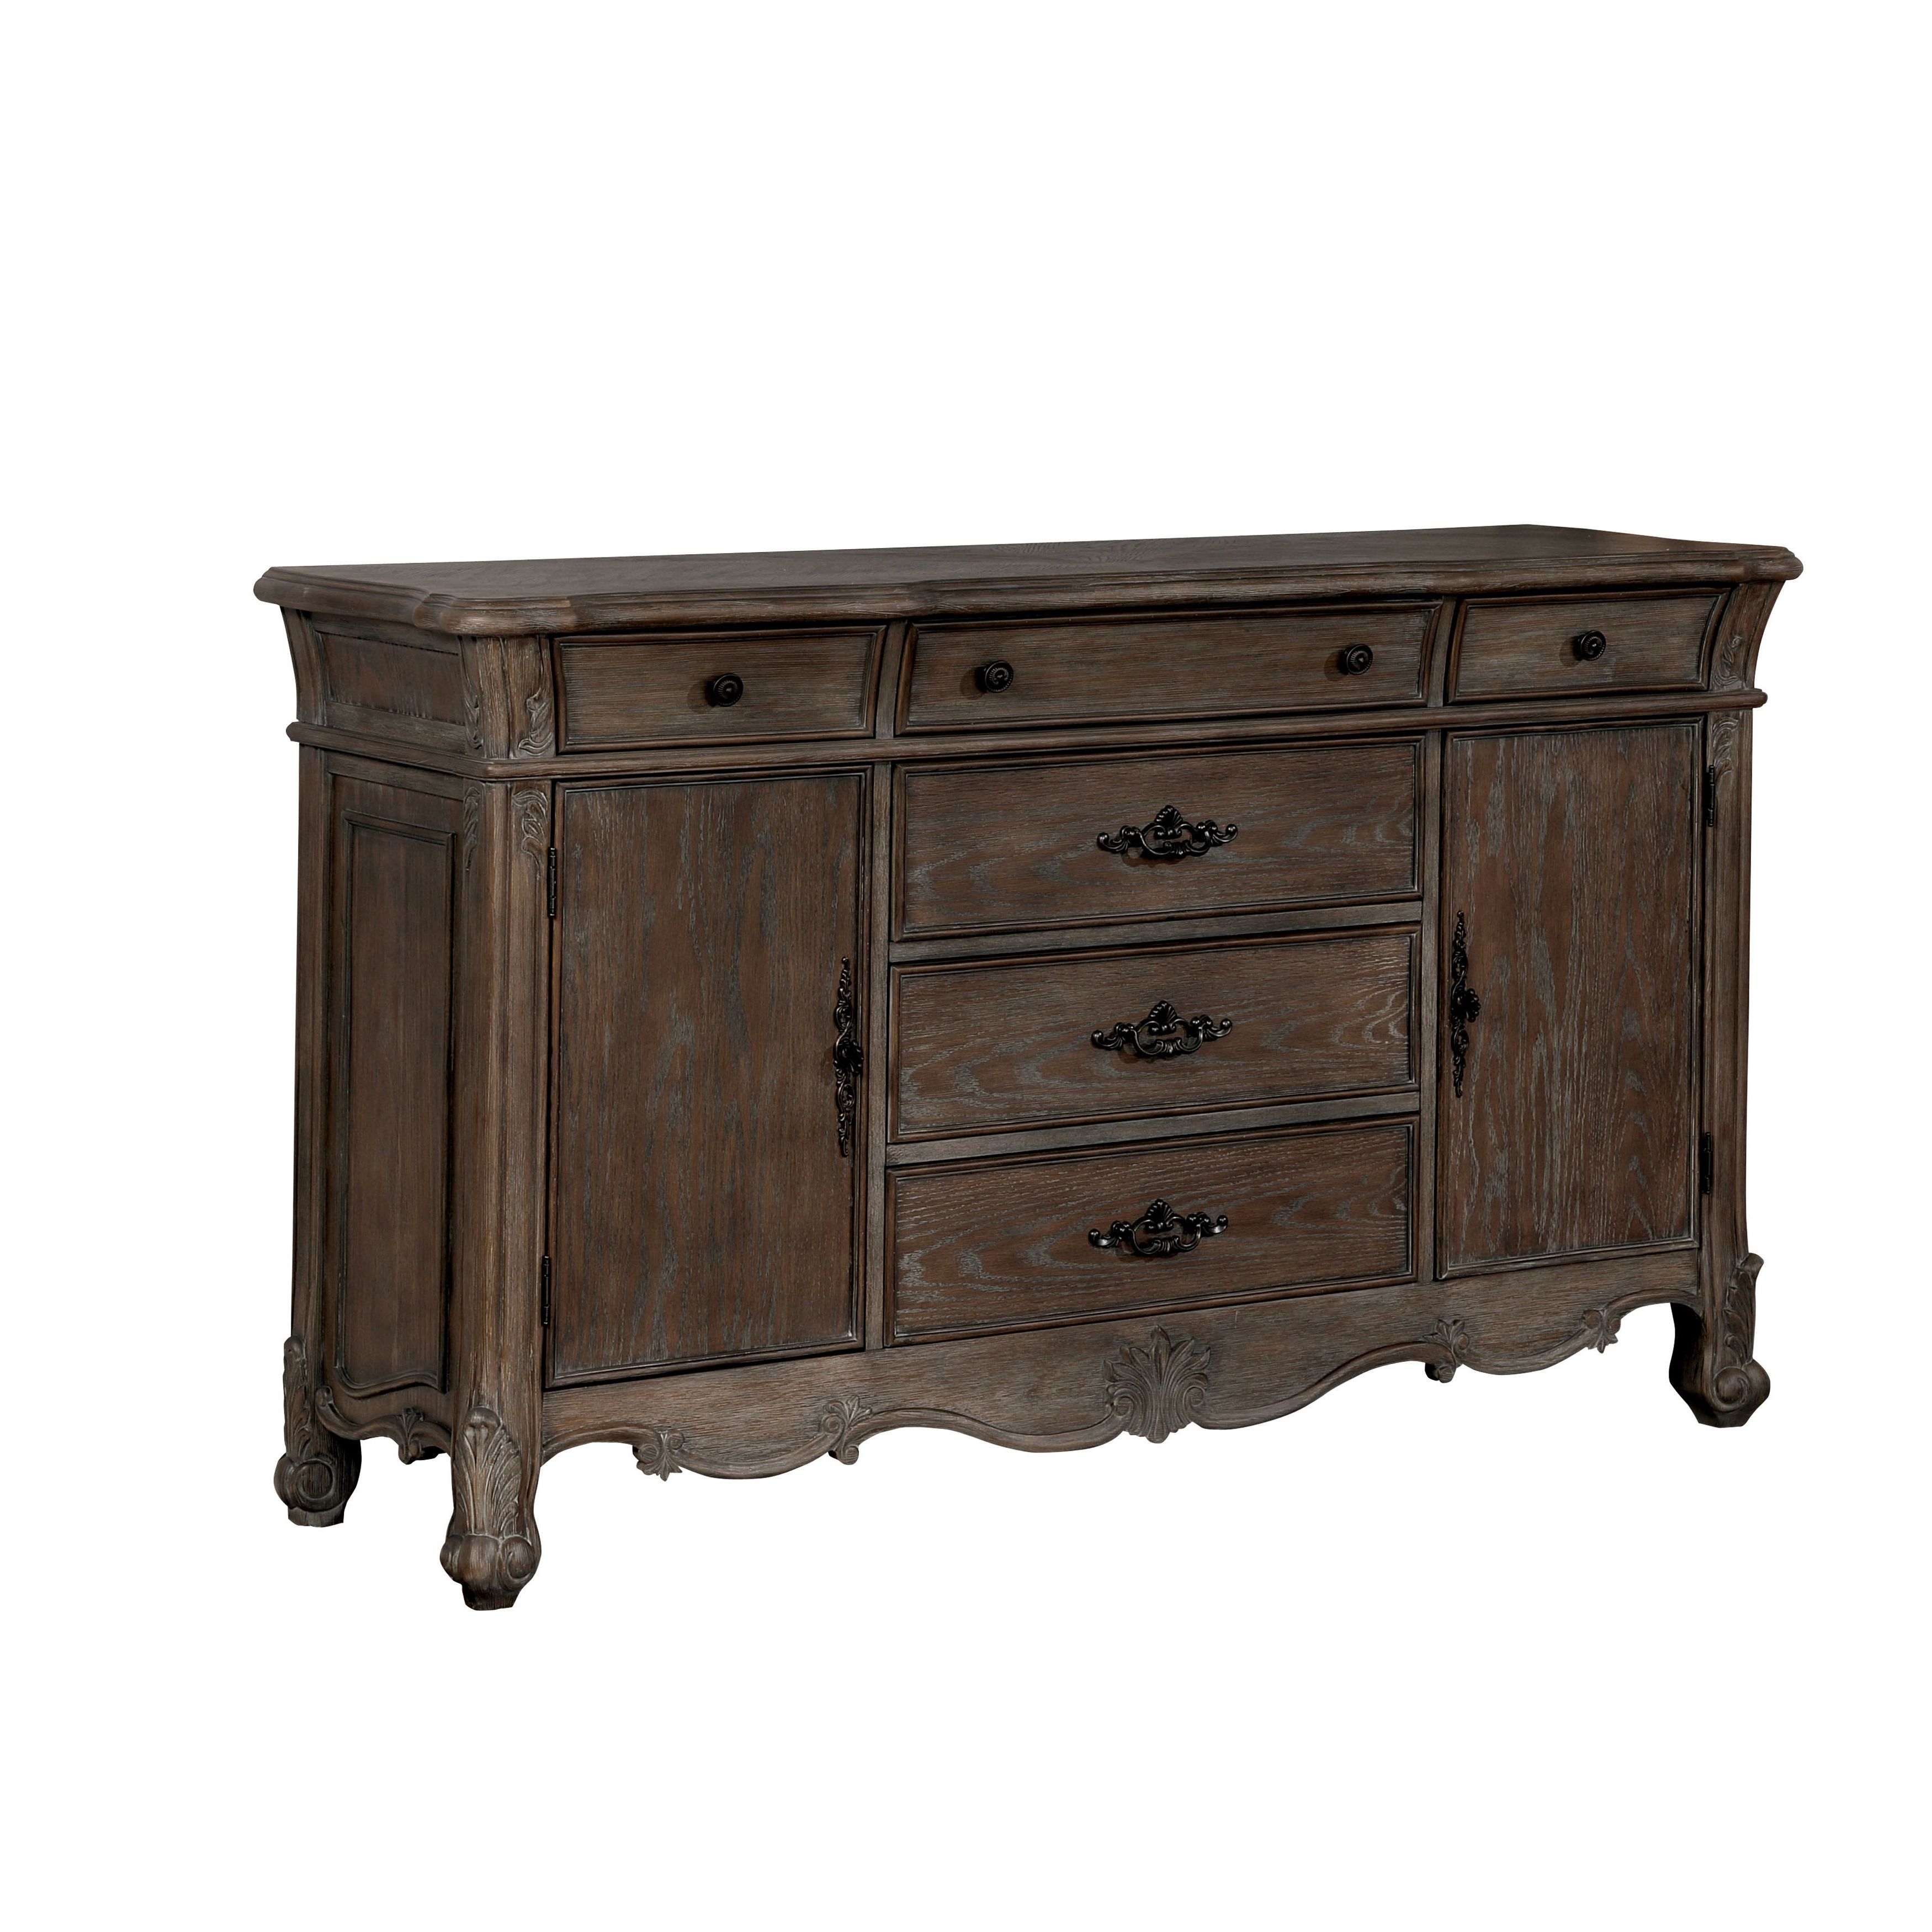 Stallworth Sideboard Pertaining To 2019 Hayslett Sideboards (View 13 of 20)